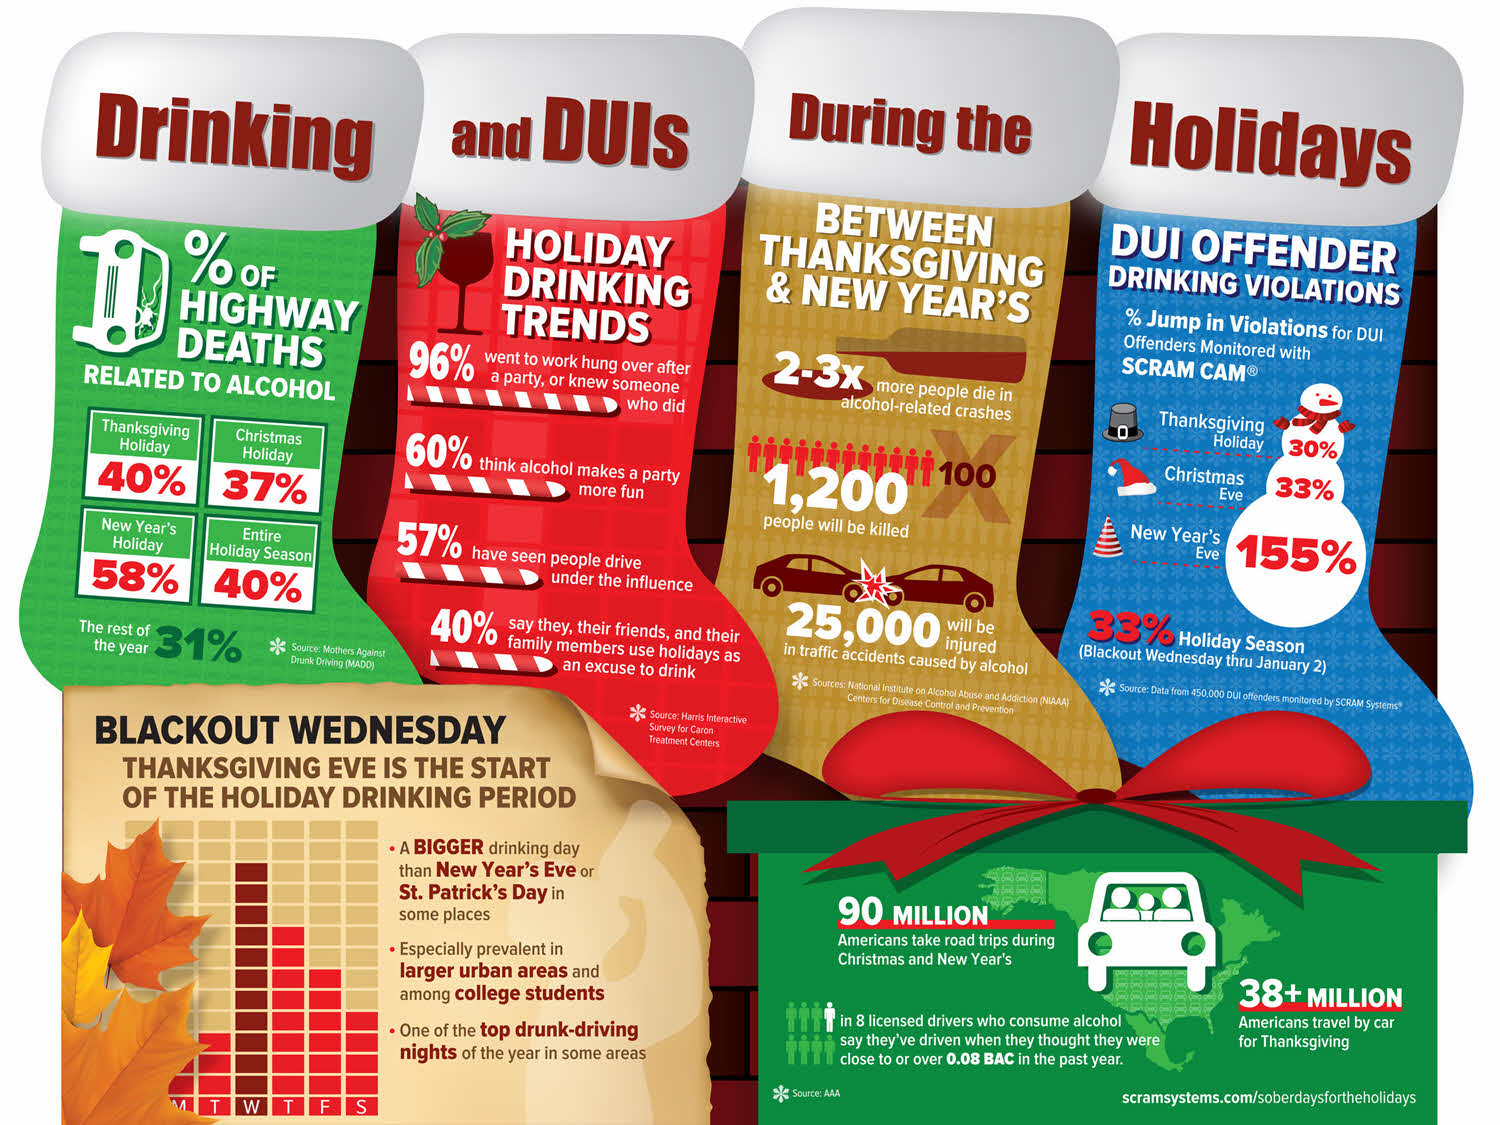 The Holiday Season Is Upon Us Drink & Share Responsibly [Infographic